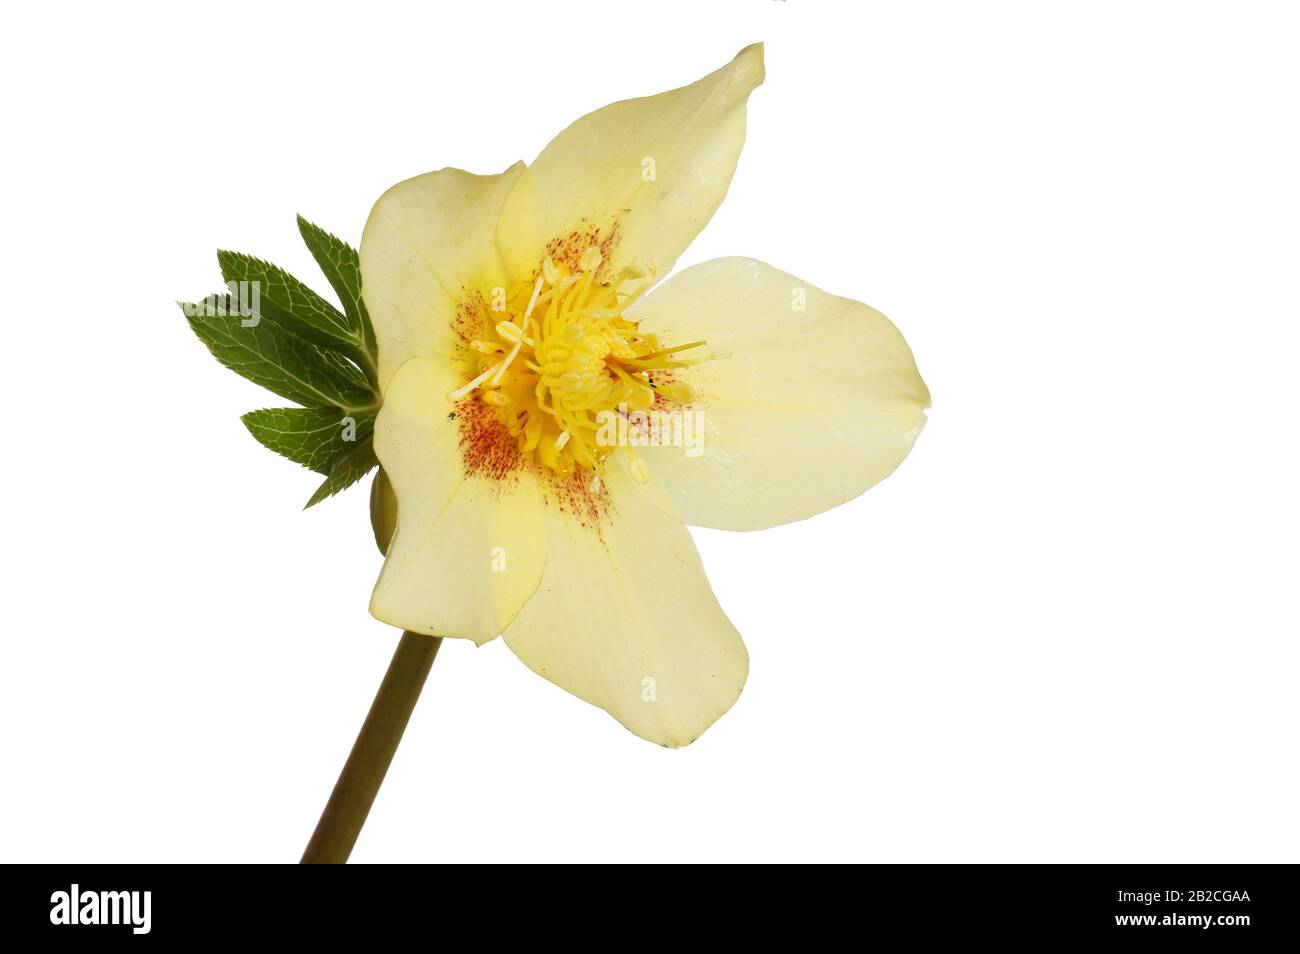 Closeup of a plae yellow hellebore flower isolated against white Stock Photo